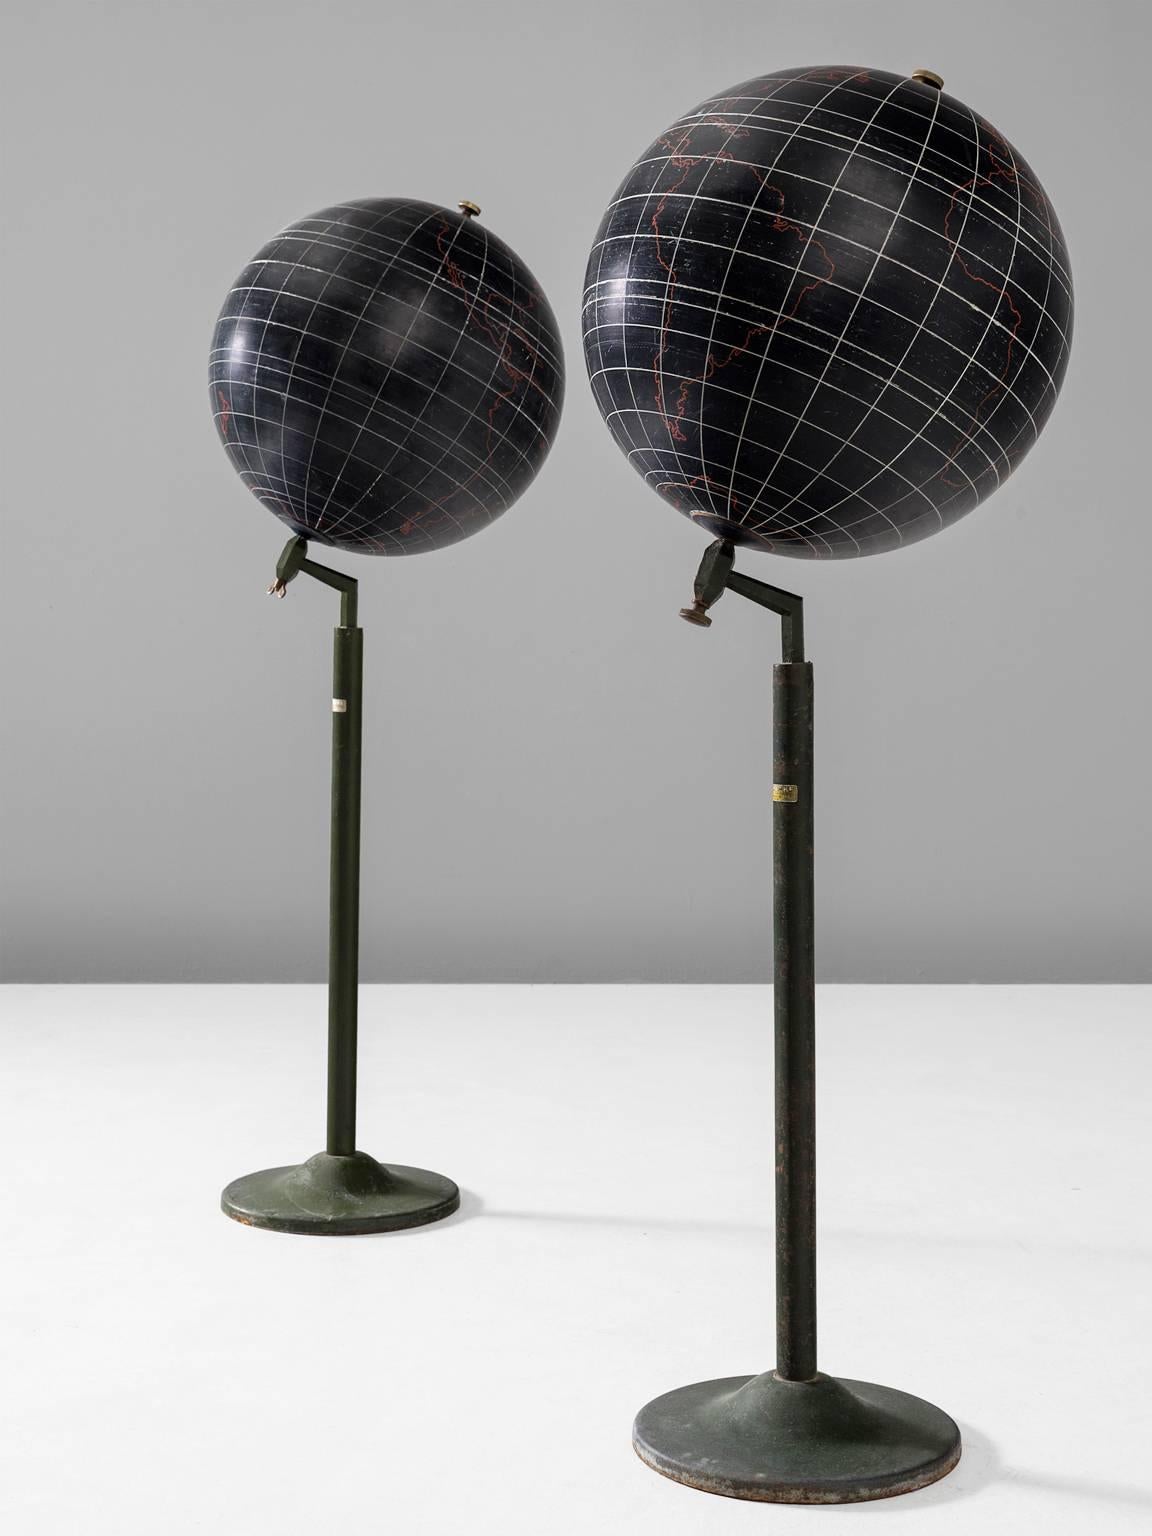 Globes, plaster and metal, 1970s, Europe.

These two black to anthracite standing globes are lovely as a pair. The coloring on the globes is done in red and the lines are white. The detailing is not very precise but instead gives an abstract IDEA